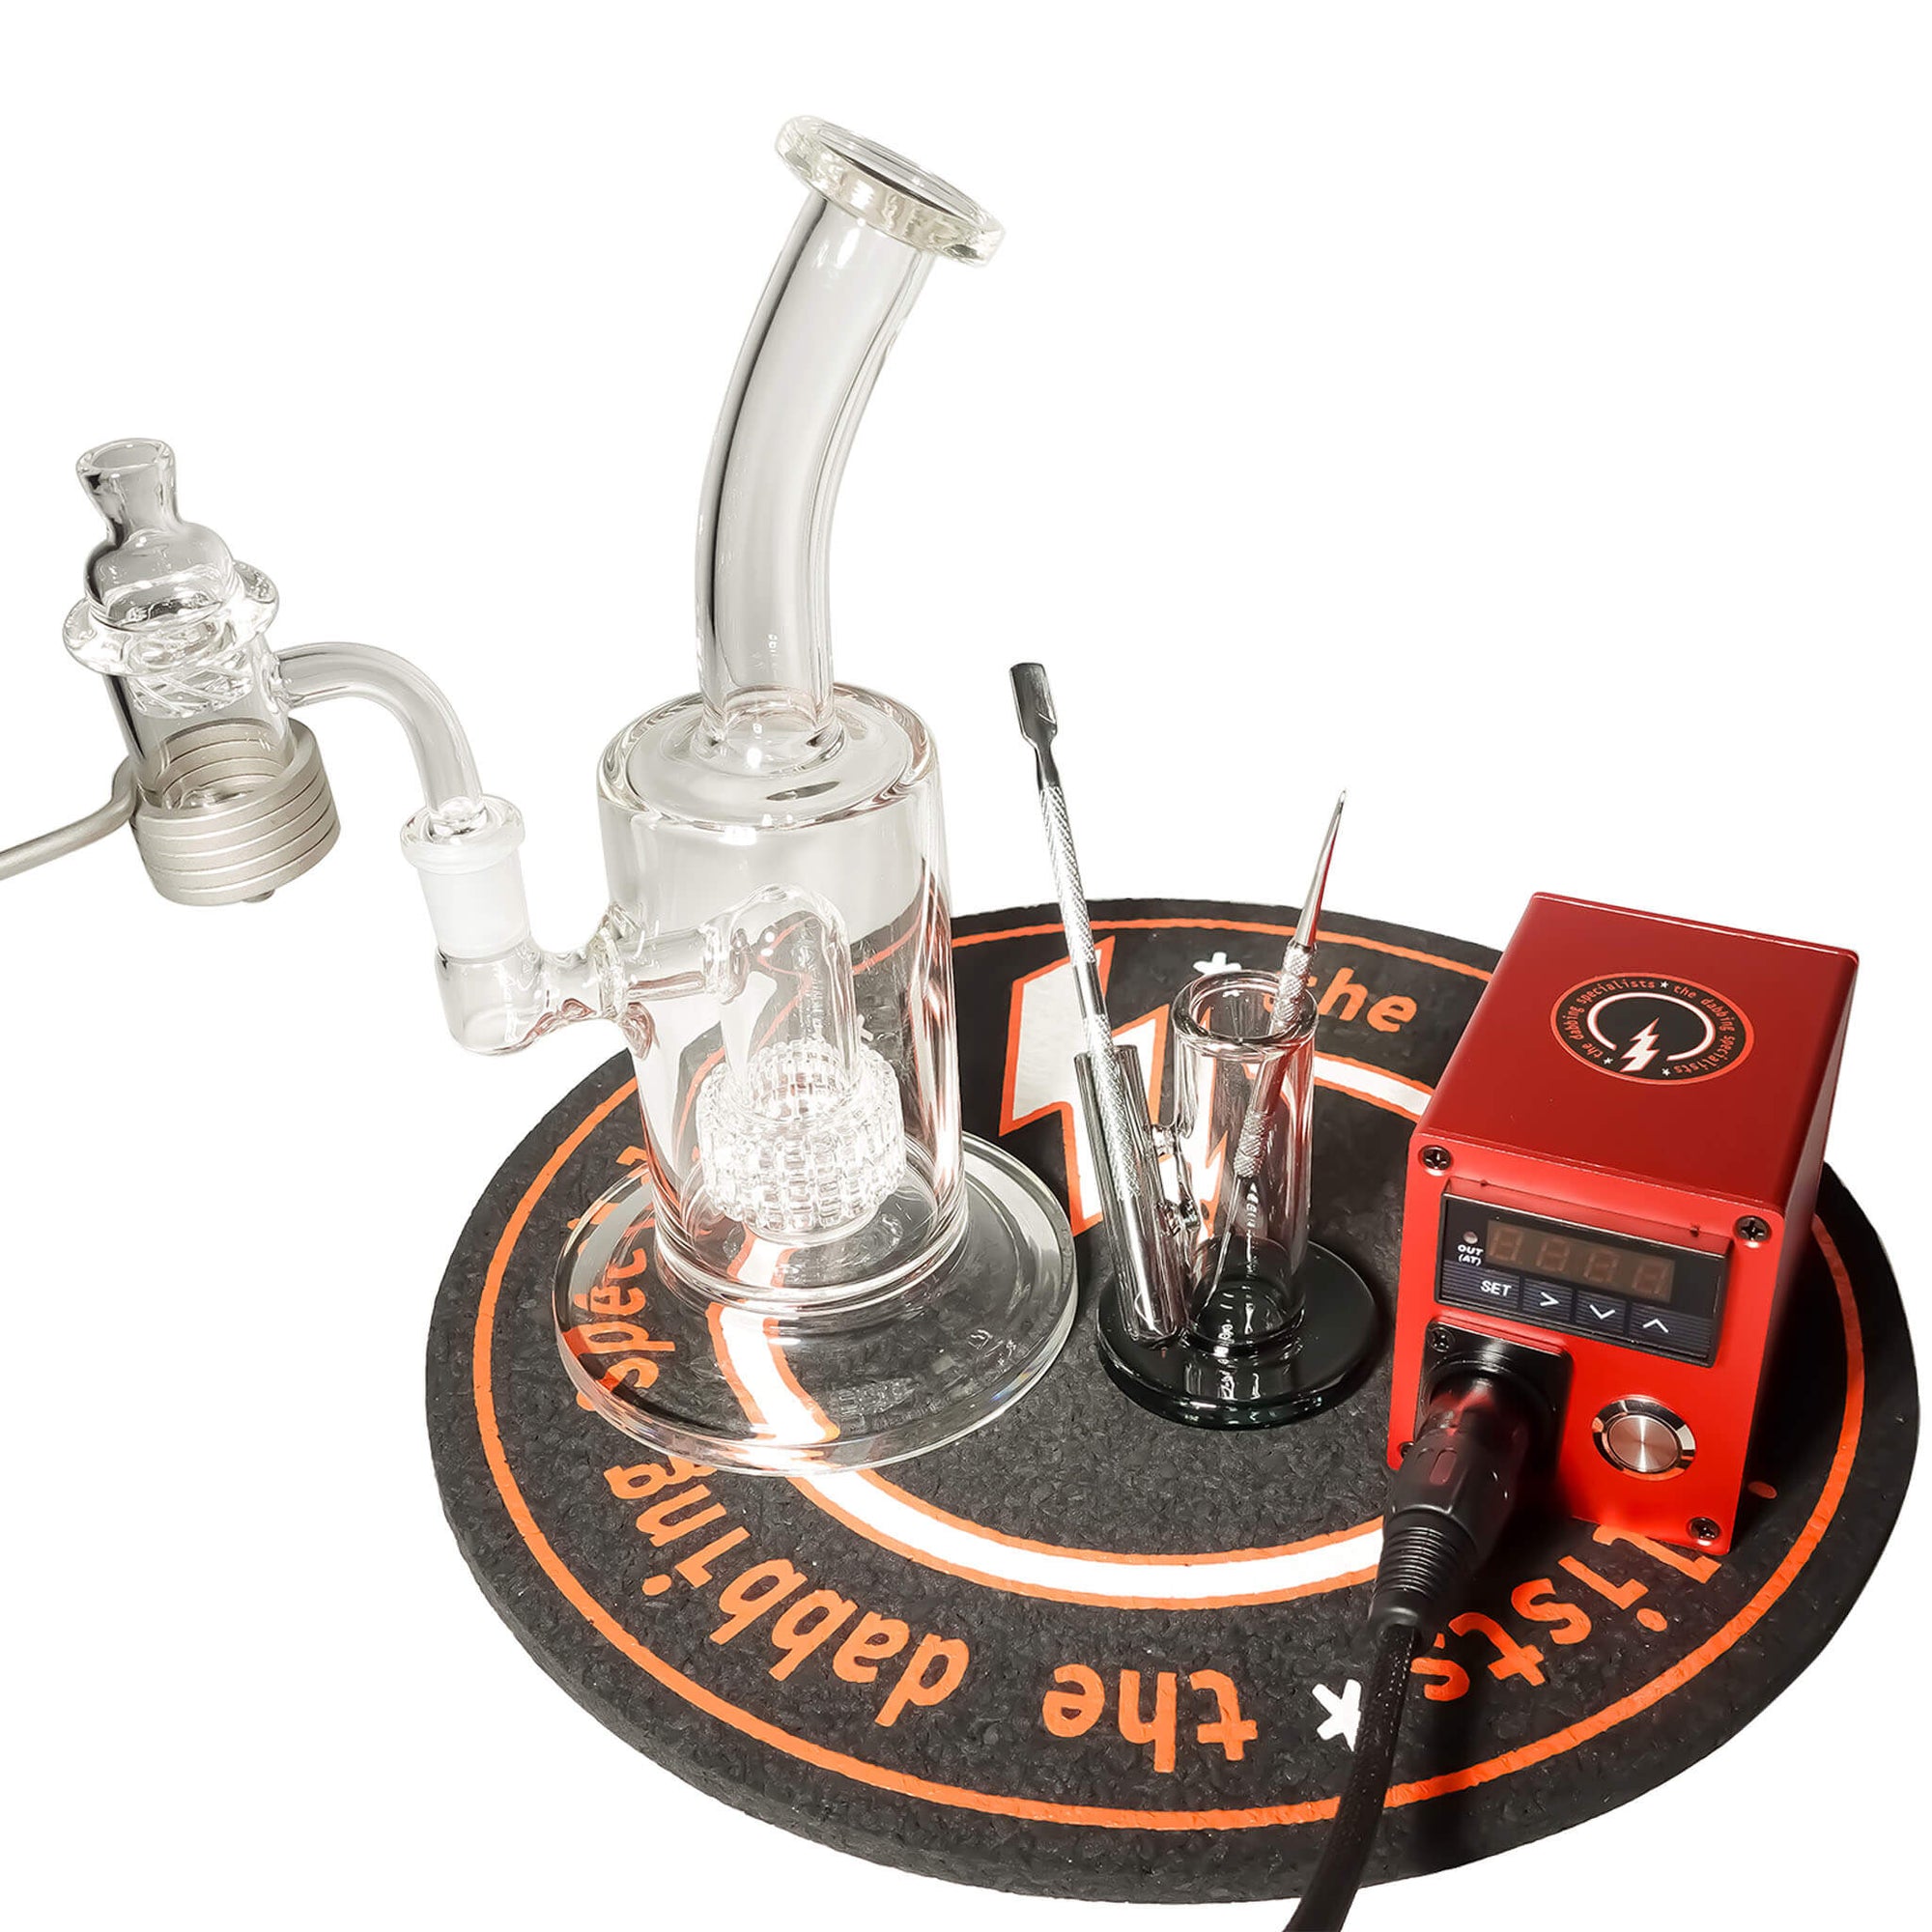 Commander 25mm E-Banger Deluxe Enail Kit | Red Kit View | the dabbing specialists